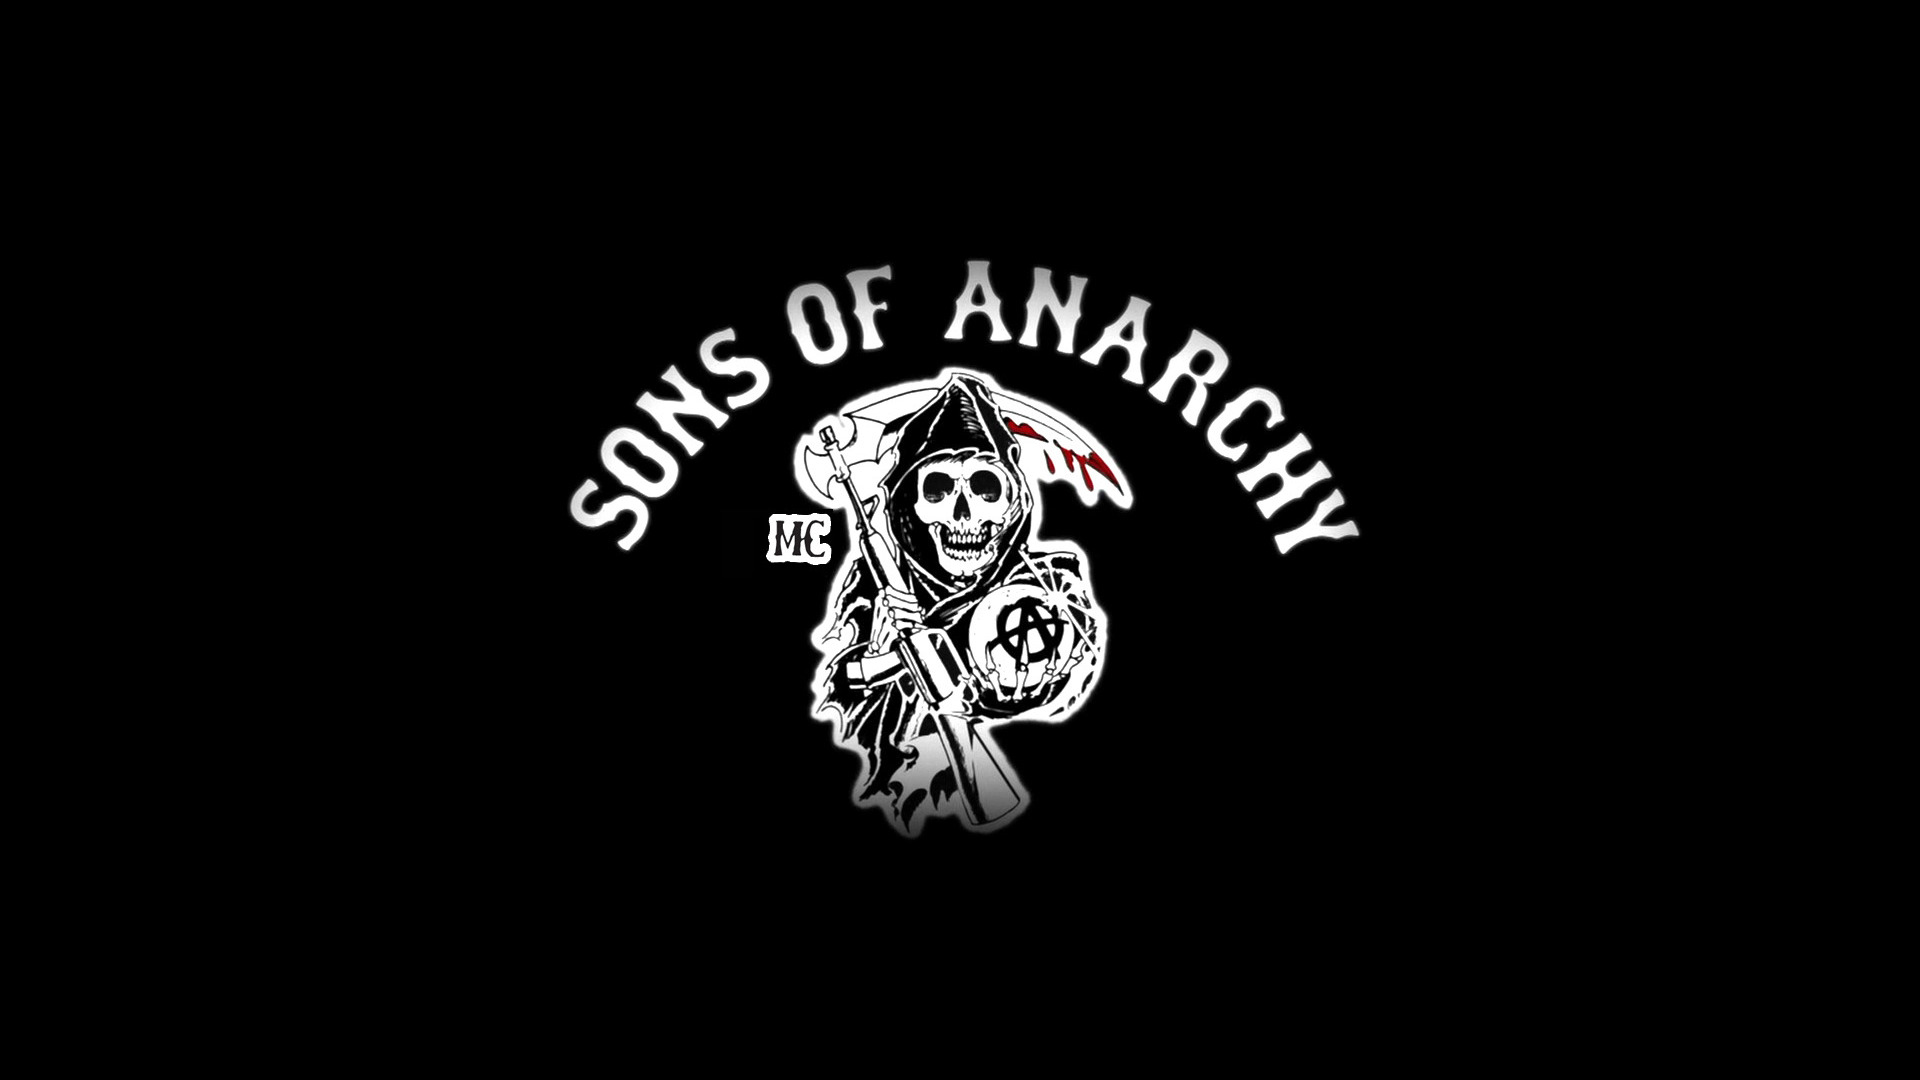 Sons Of Anarchy Background Pictures Image